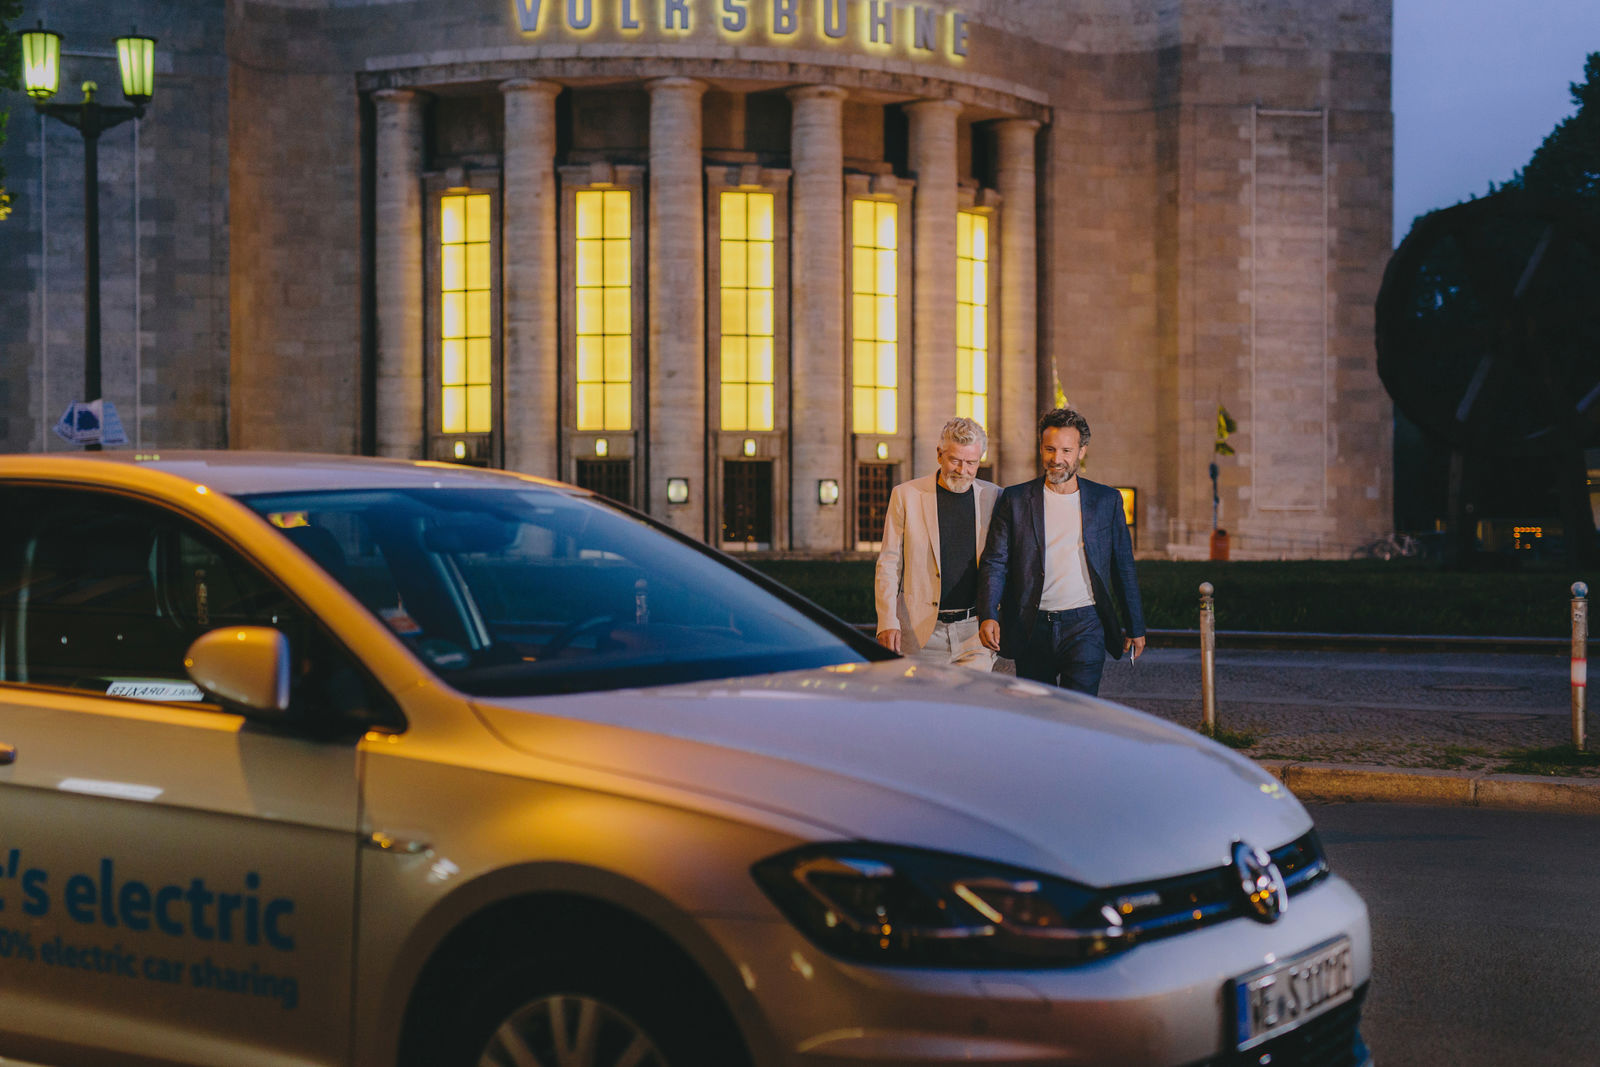 Volkswagen WeShare launched in Berlin as full-electric service